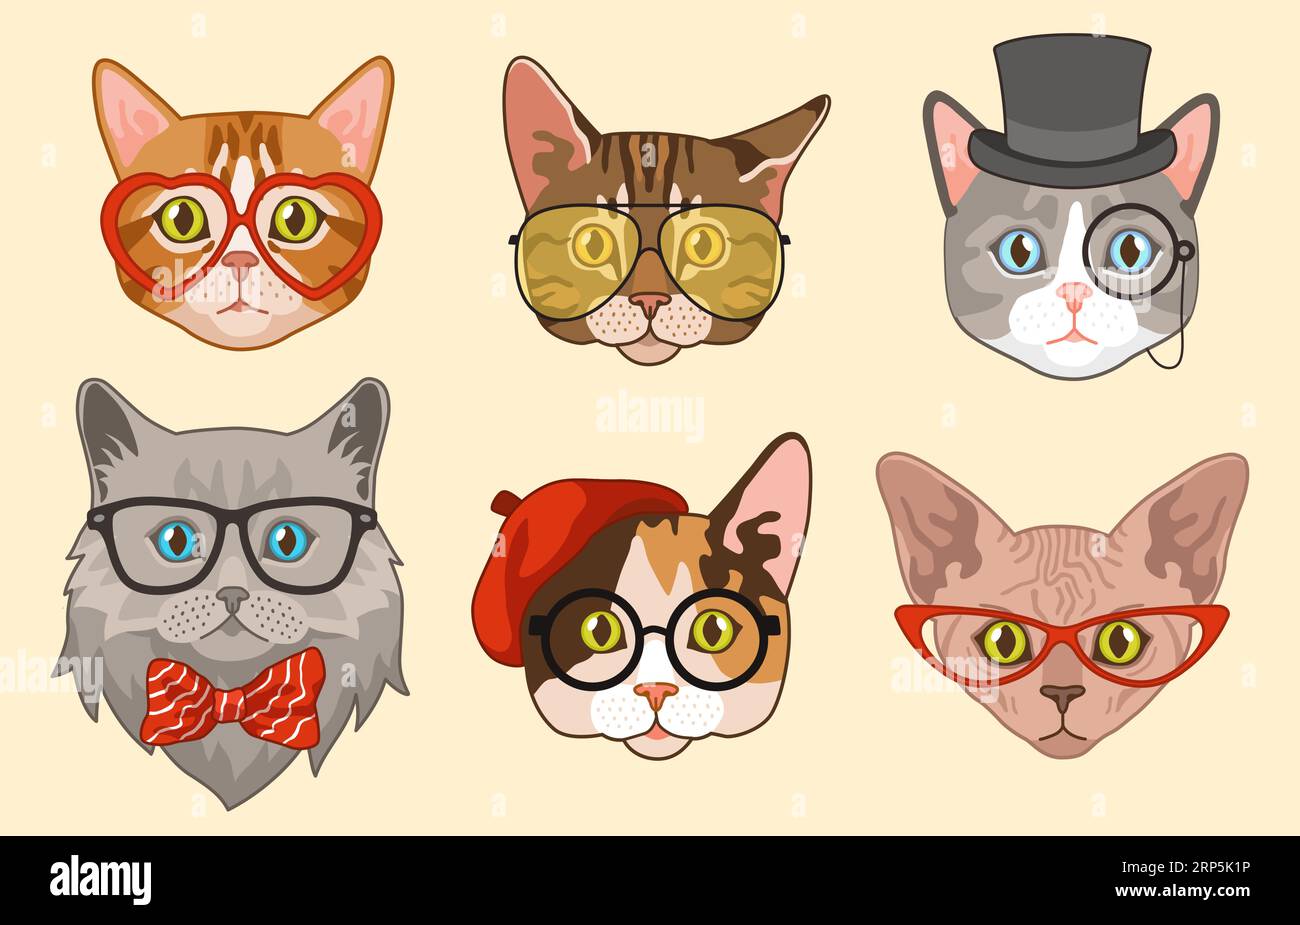 Cat angry emoji pet evil emotions avatar kitty Vector Image